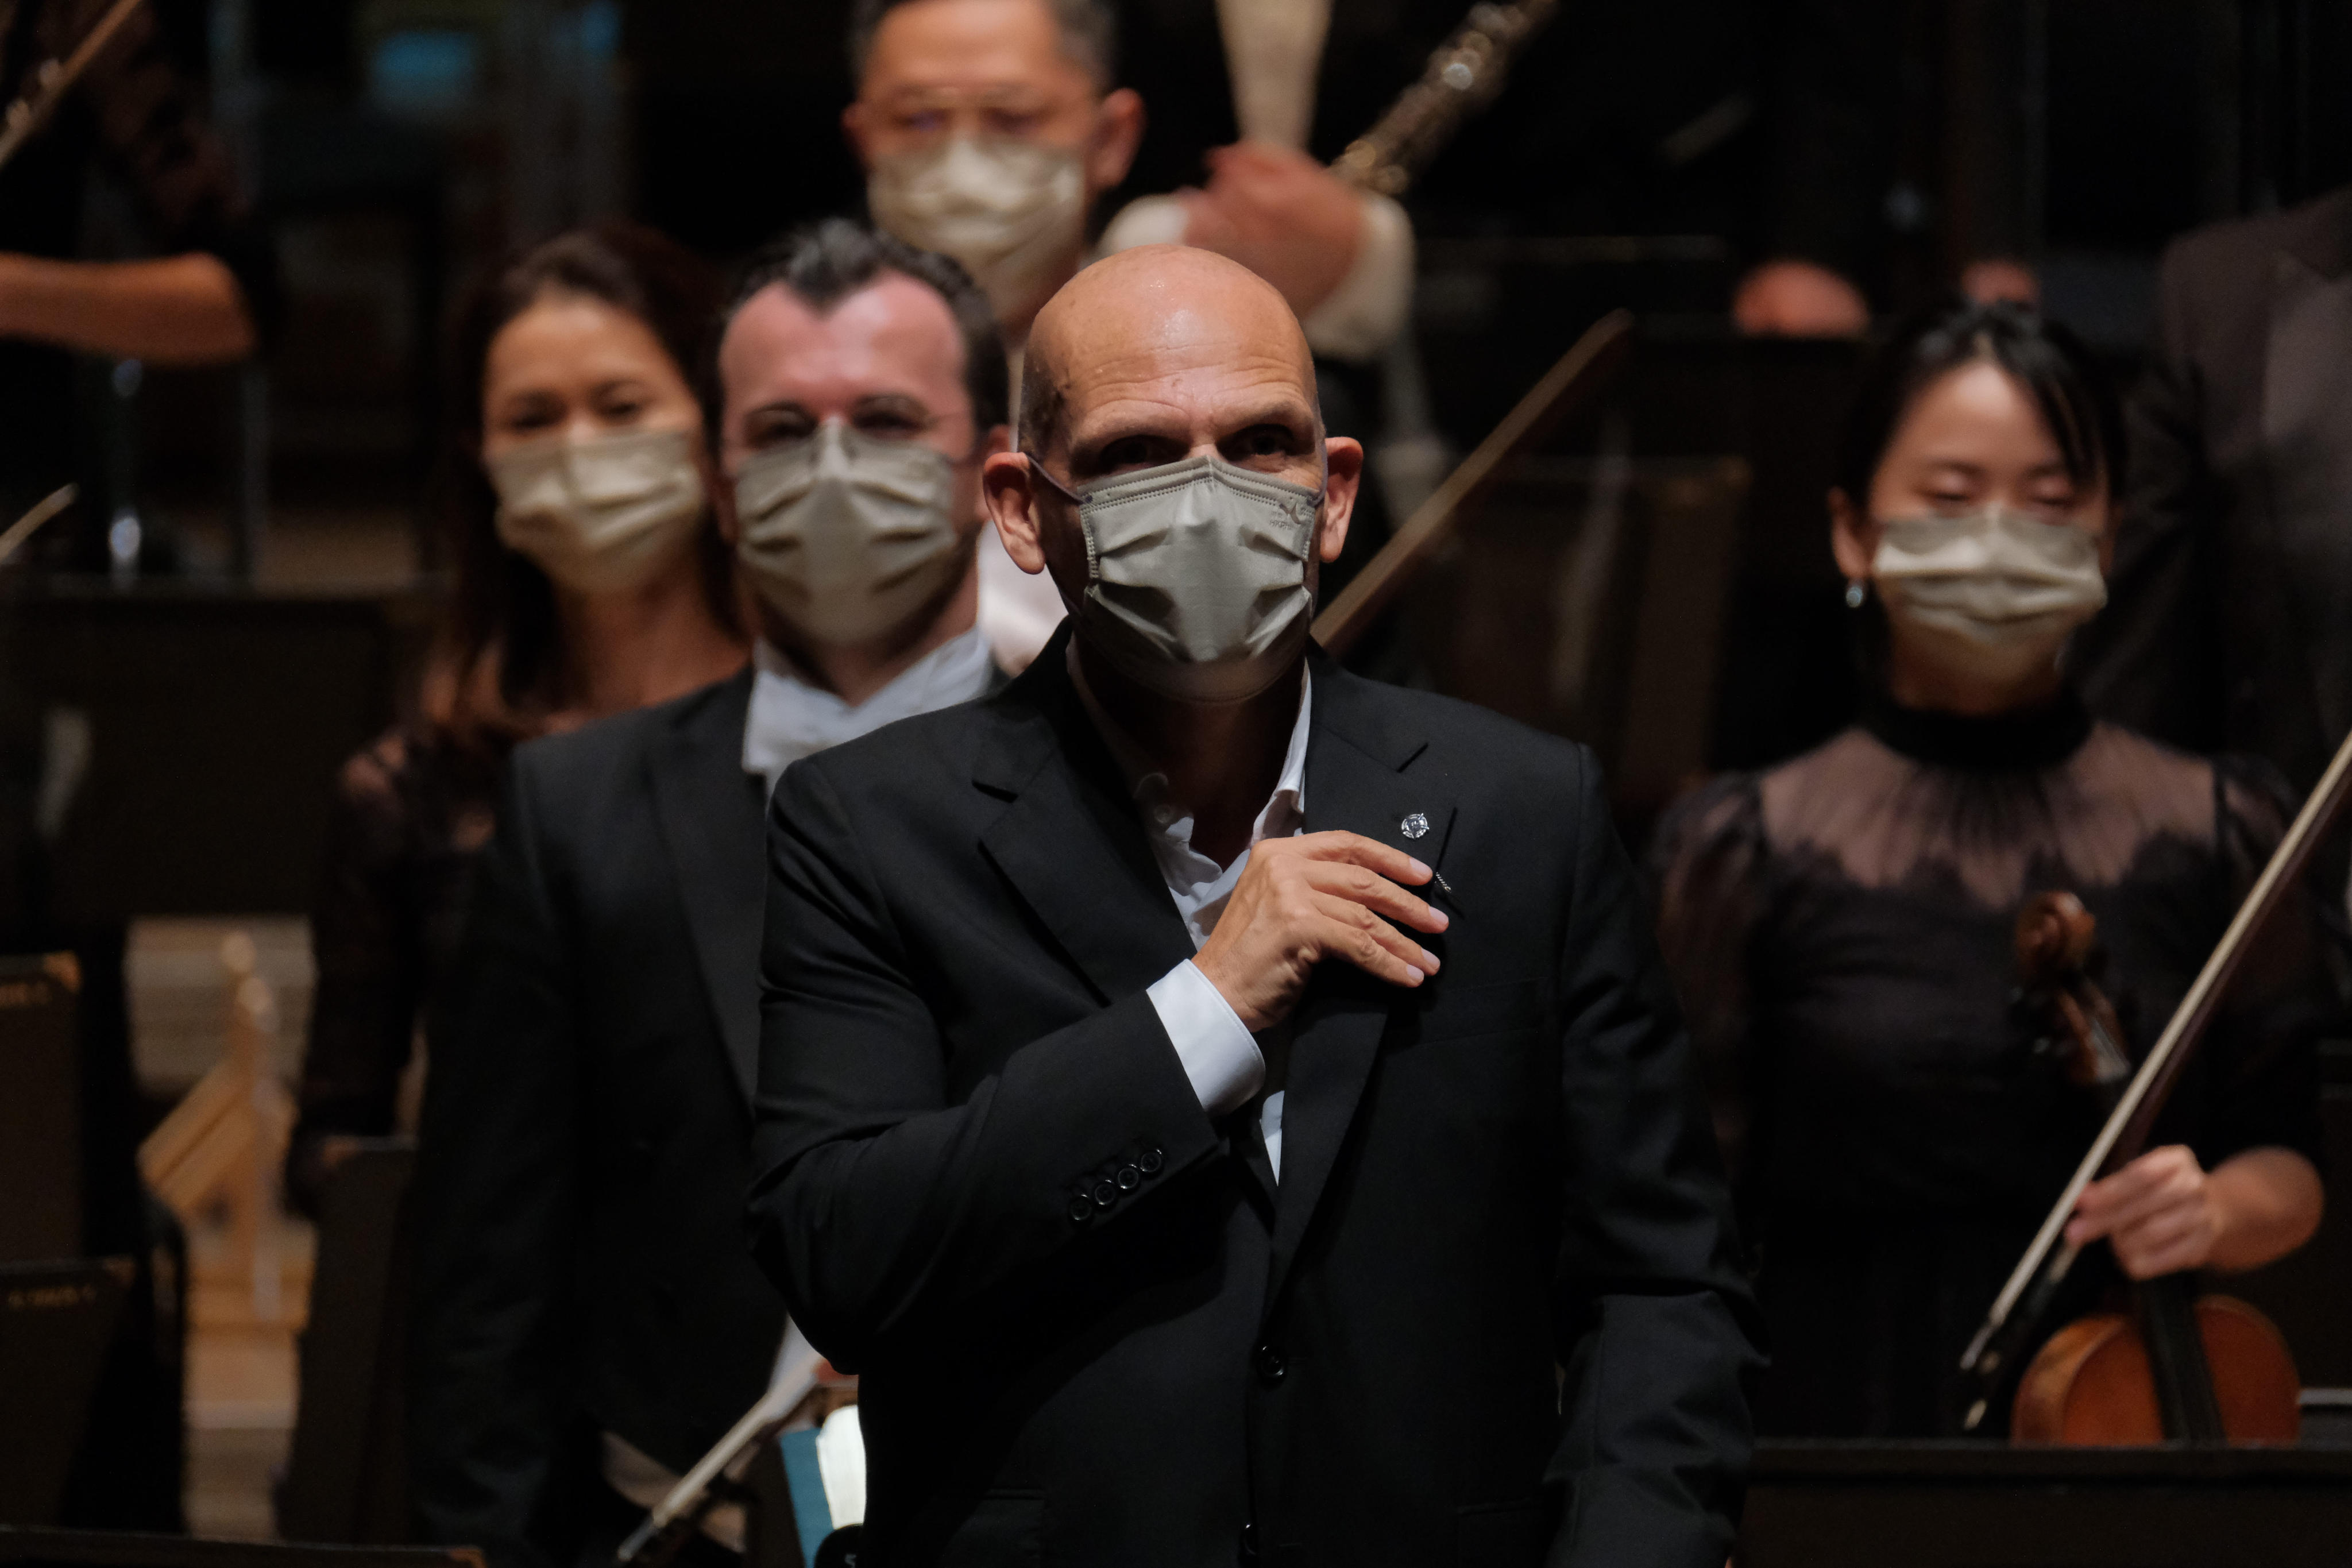 The Hong Kong Philharmonic Orchestra opened its 2021/22 season under the  baton of music director Jaap van Zweden on September 3. Photo: Hong Kong Philharmonic Orchestra